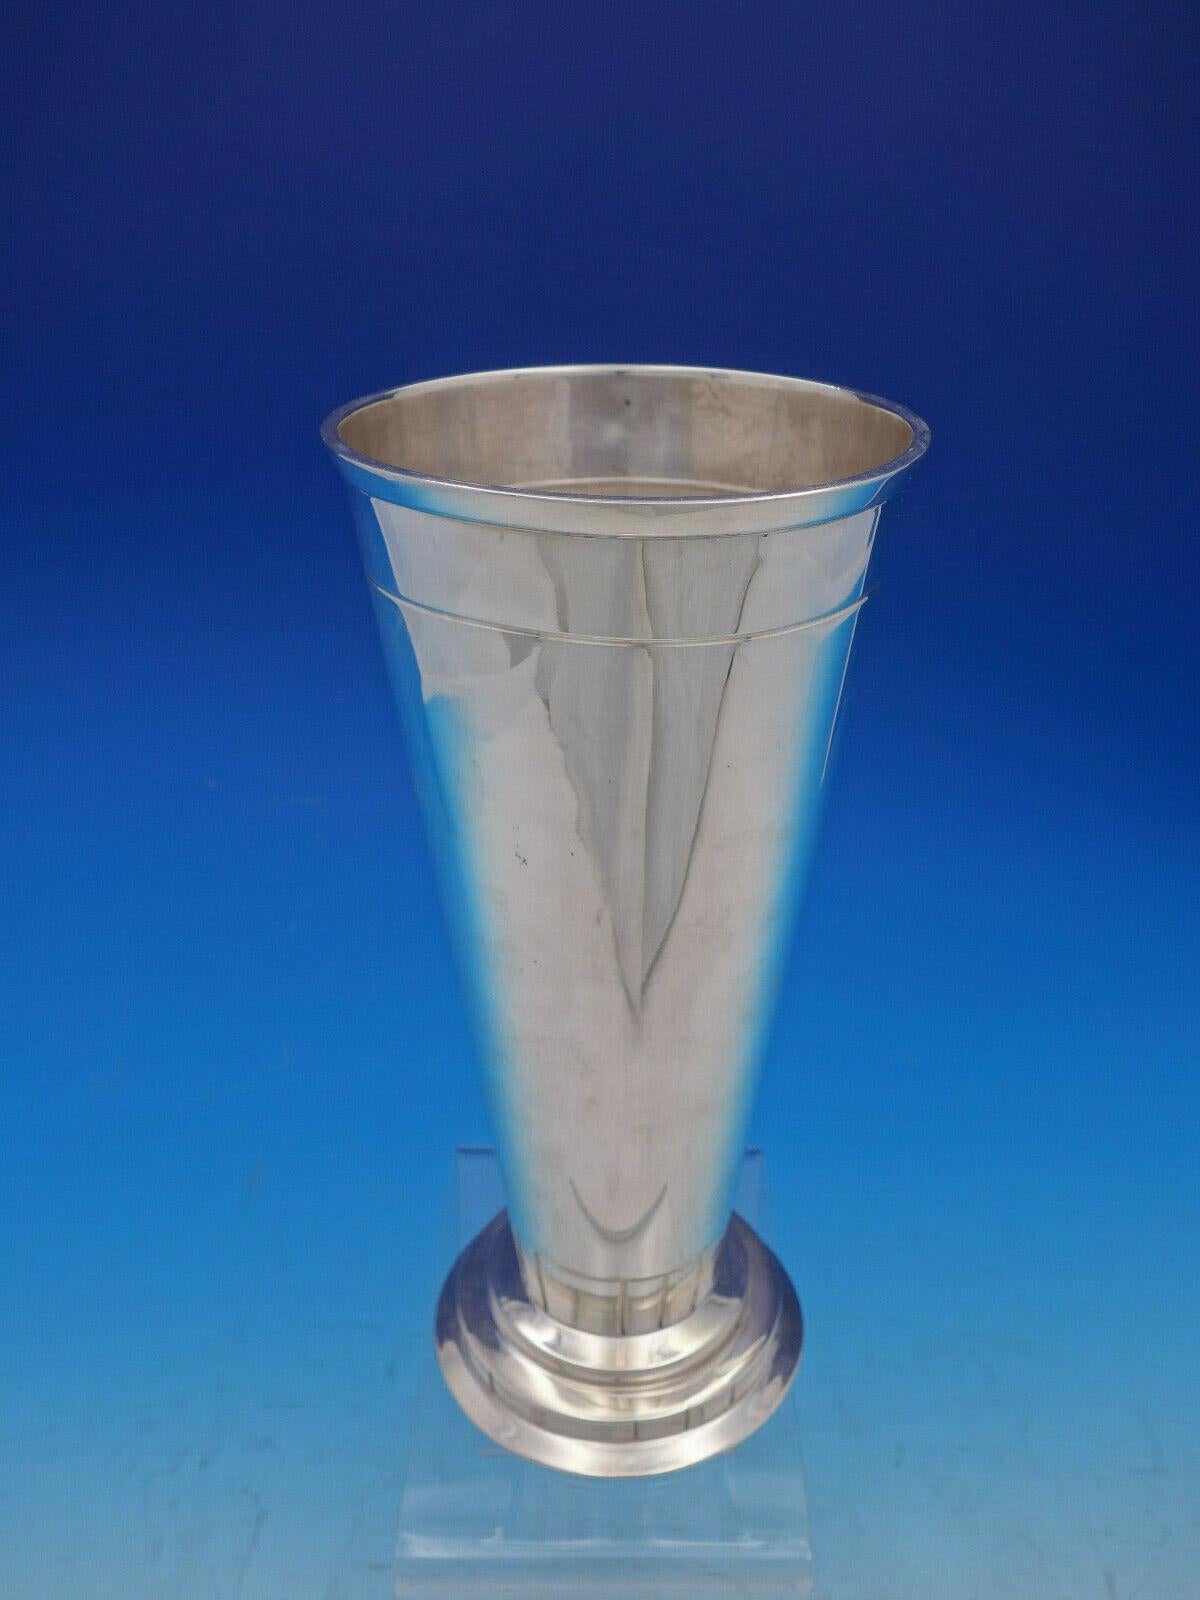 Rare modern American by Eric Magnussen sterling silver vase with modernist geometric design, marked #A14072. It measures: 10